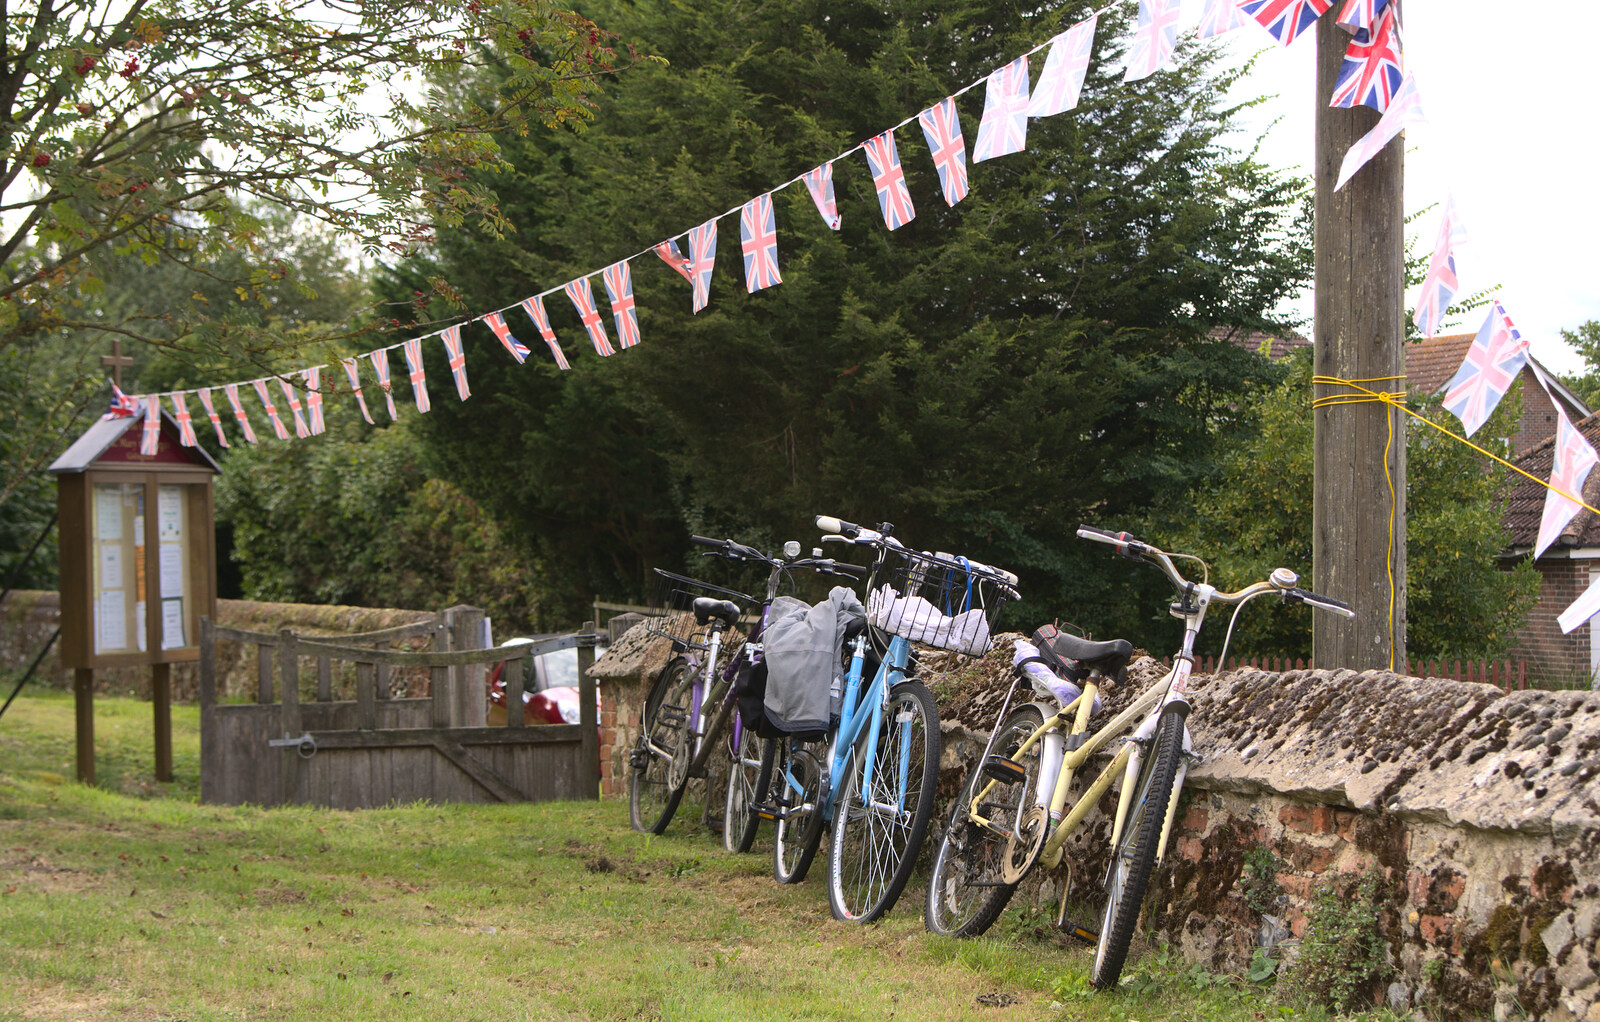 Bikes and Union Flag bunting from The Oaksmere, and the Gislingham Flower Festival, Suffolk - 24th August 2014